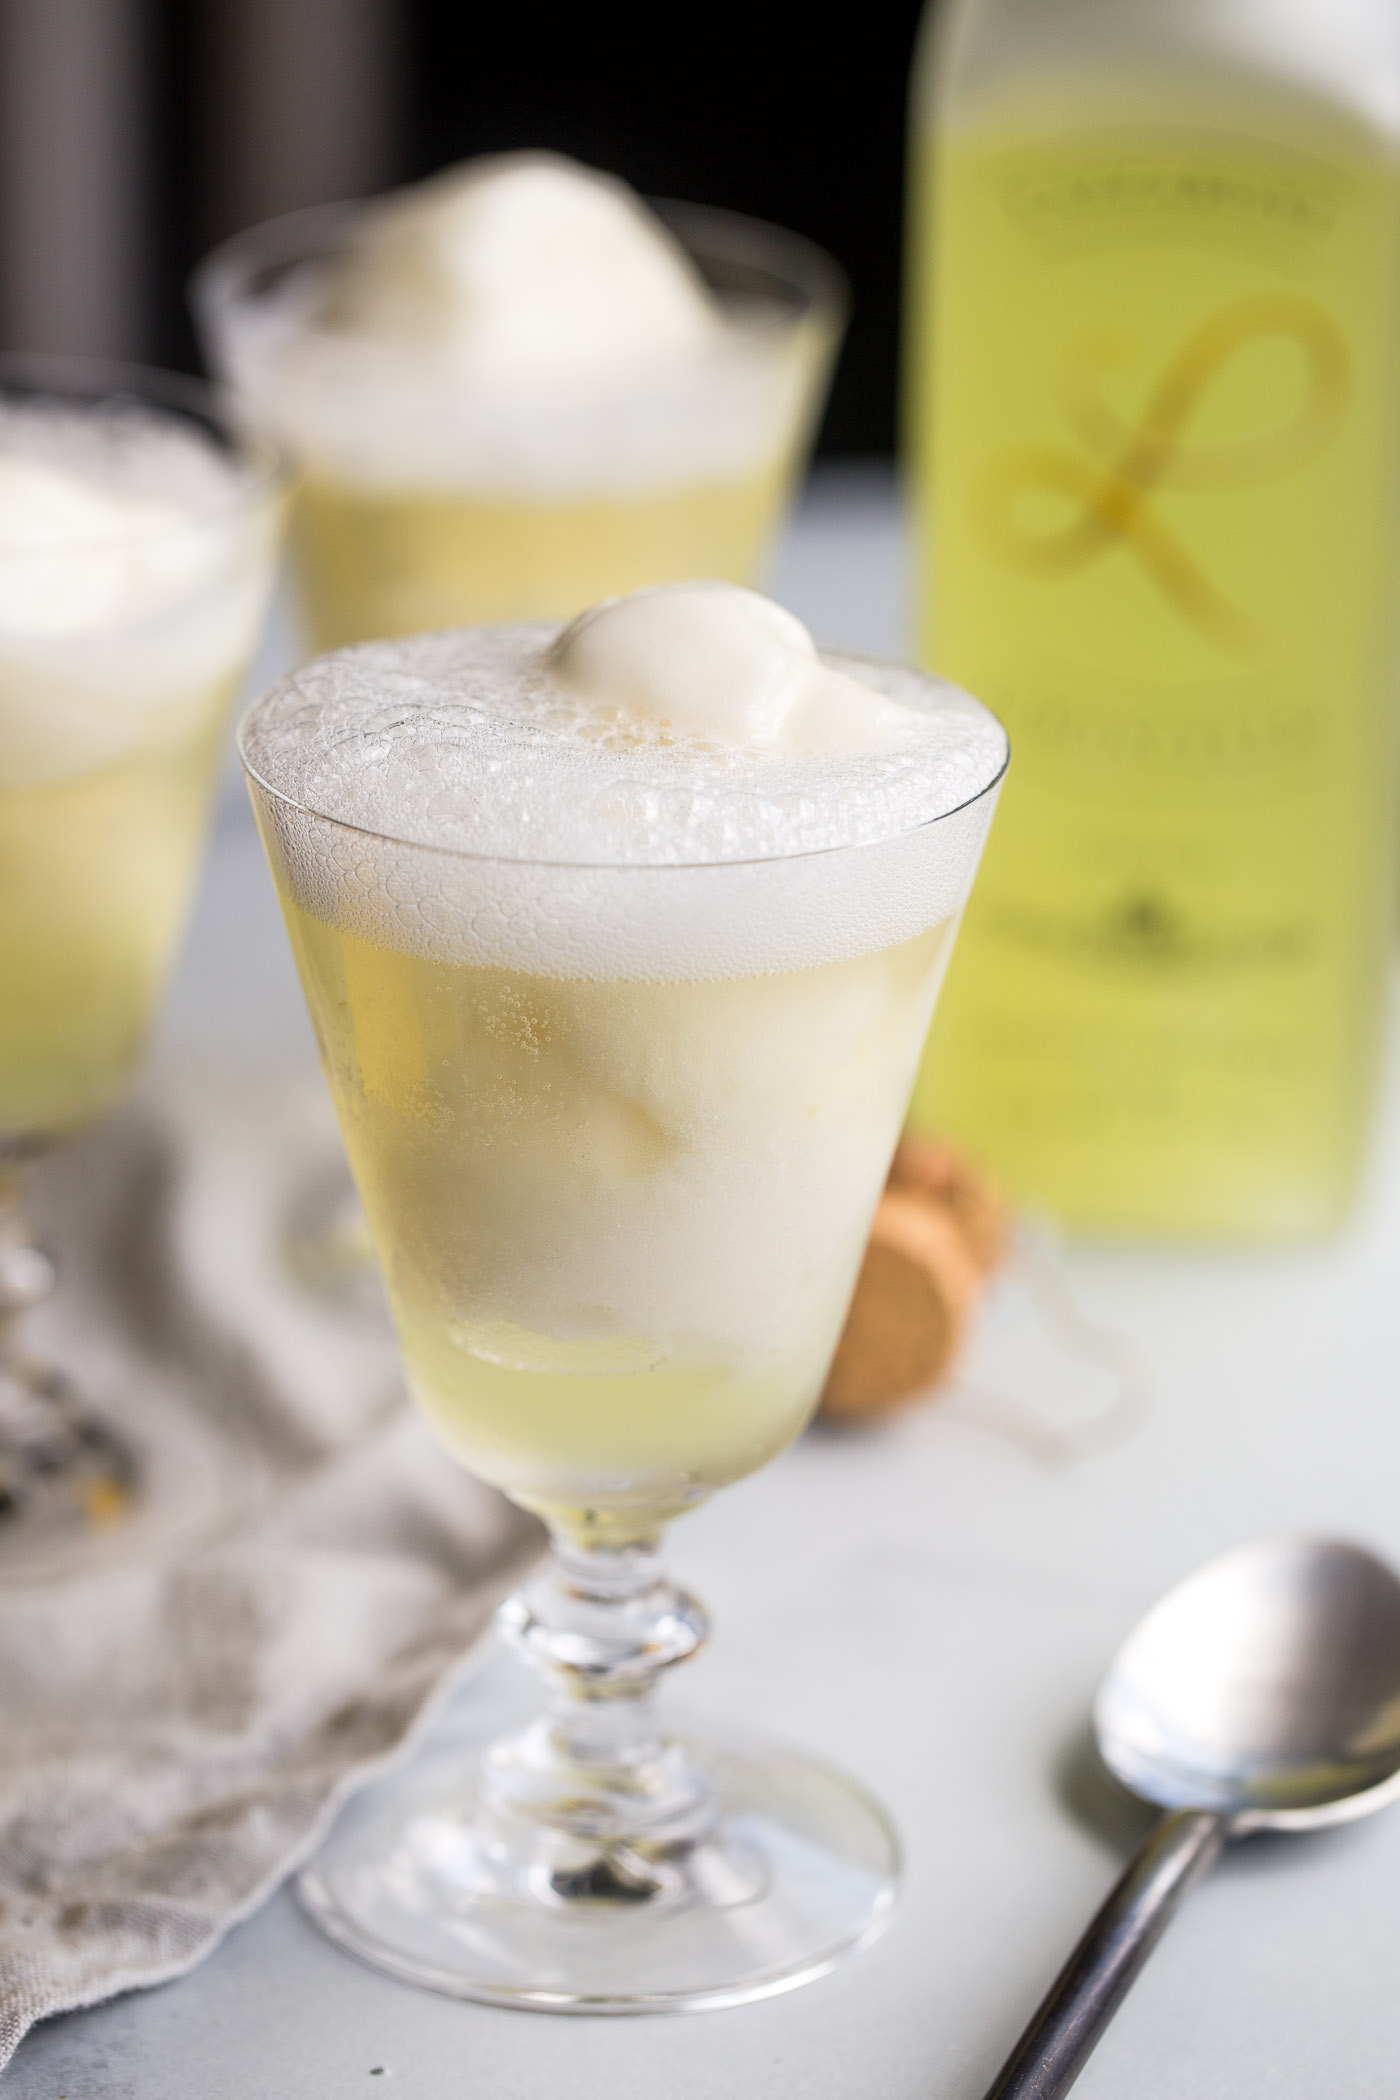 3-ingredient limoncello prosecco floats with lemon sorbetto are the perfect boozy dessert cocktail for summer! a scoop of lemon sorbetto gets simply drowned with a shot of limoncello & topped off with a generous splash of prosecco. light, refreshing, & easy. the perfect ending for any summer gathering!